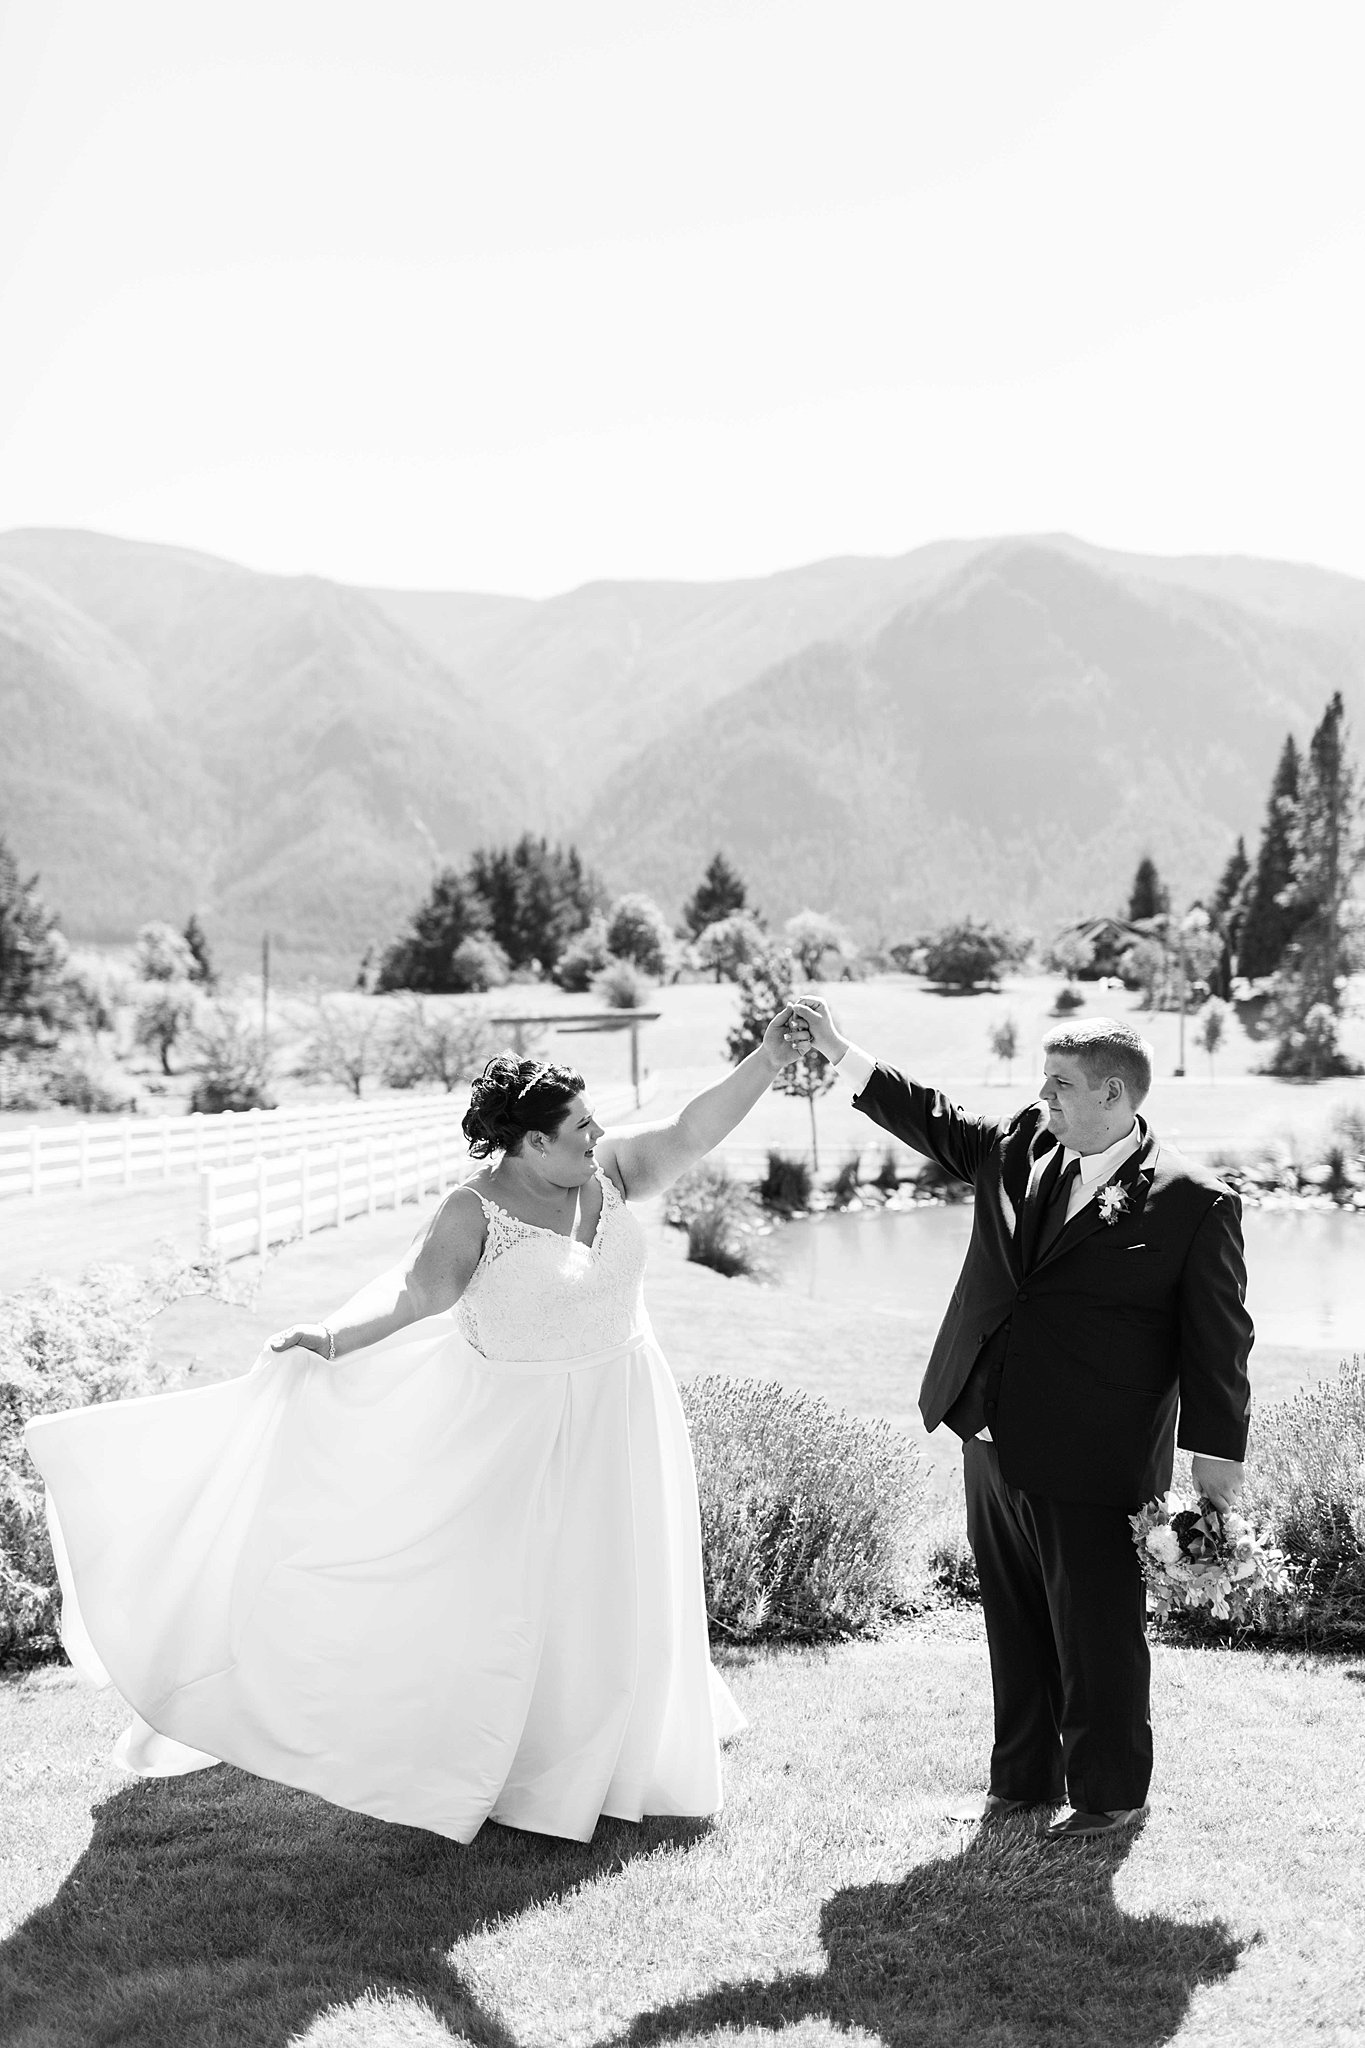 Bella and Wright's Wind Mountain Ranch Wedding